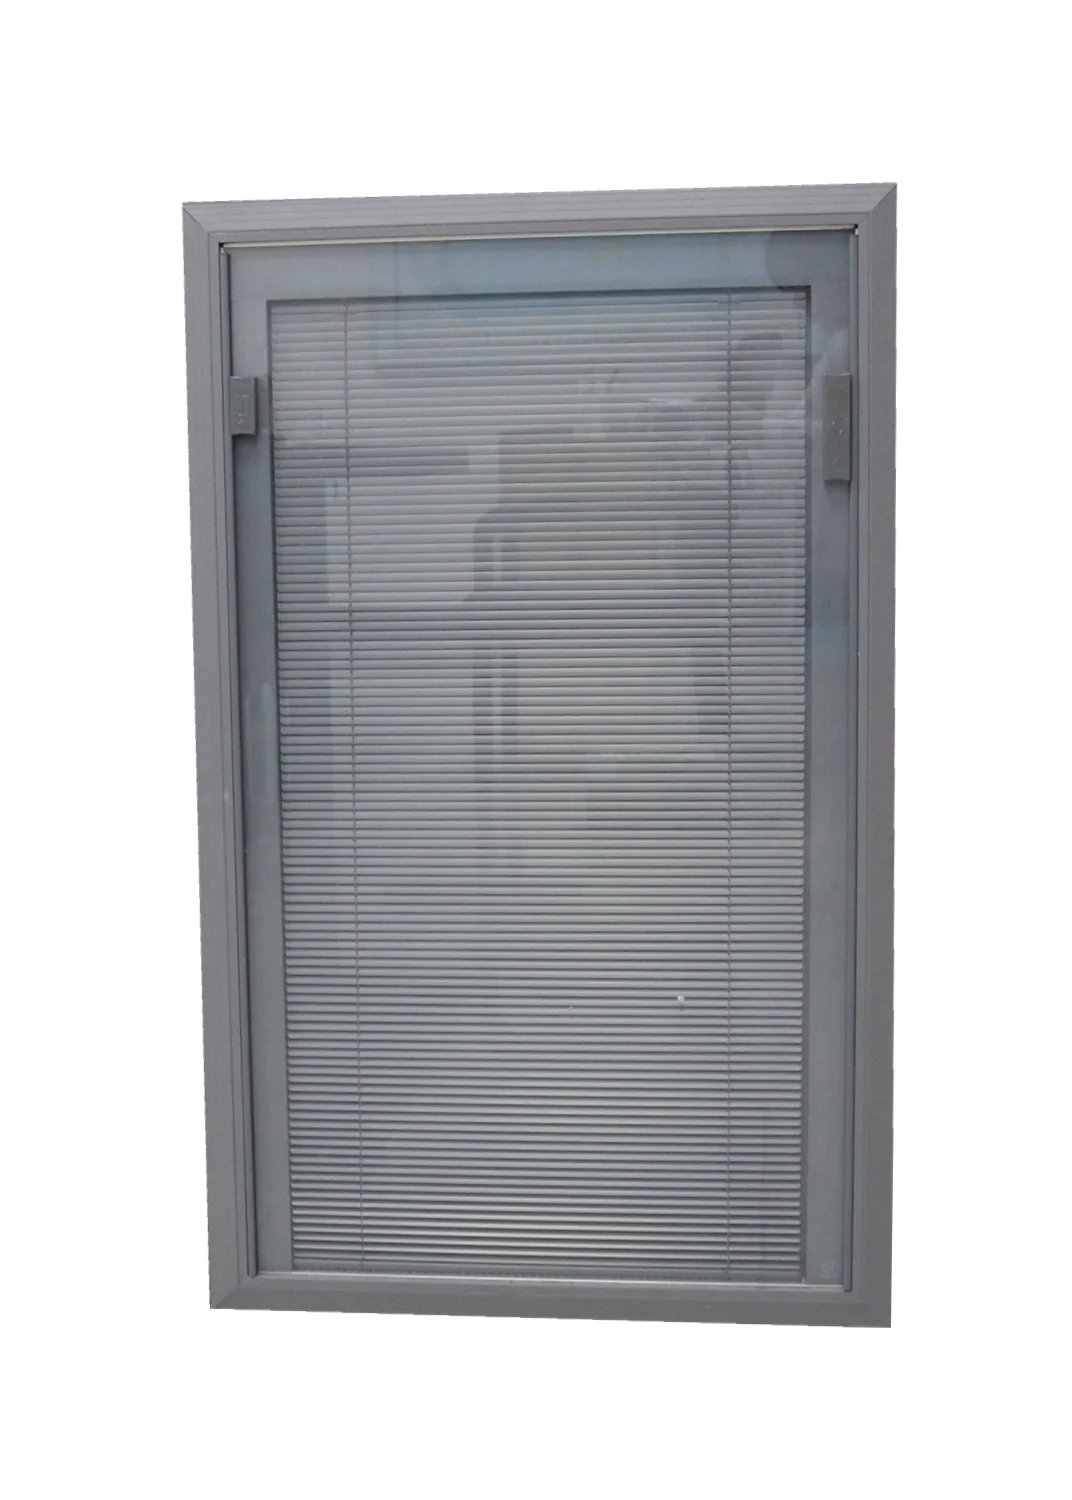 Built-in louver insulating glass